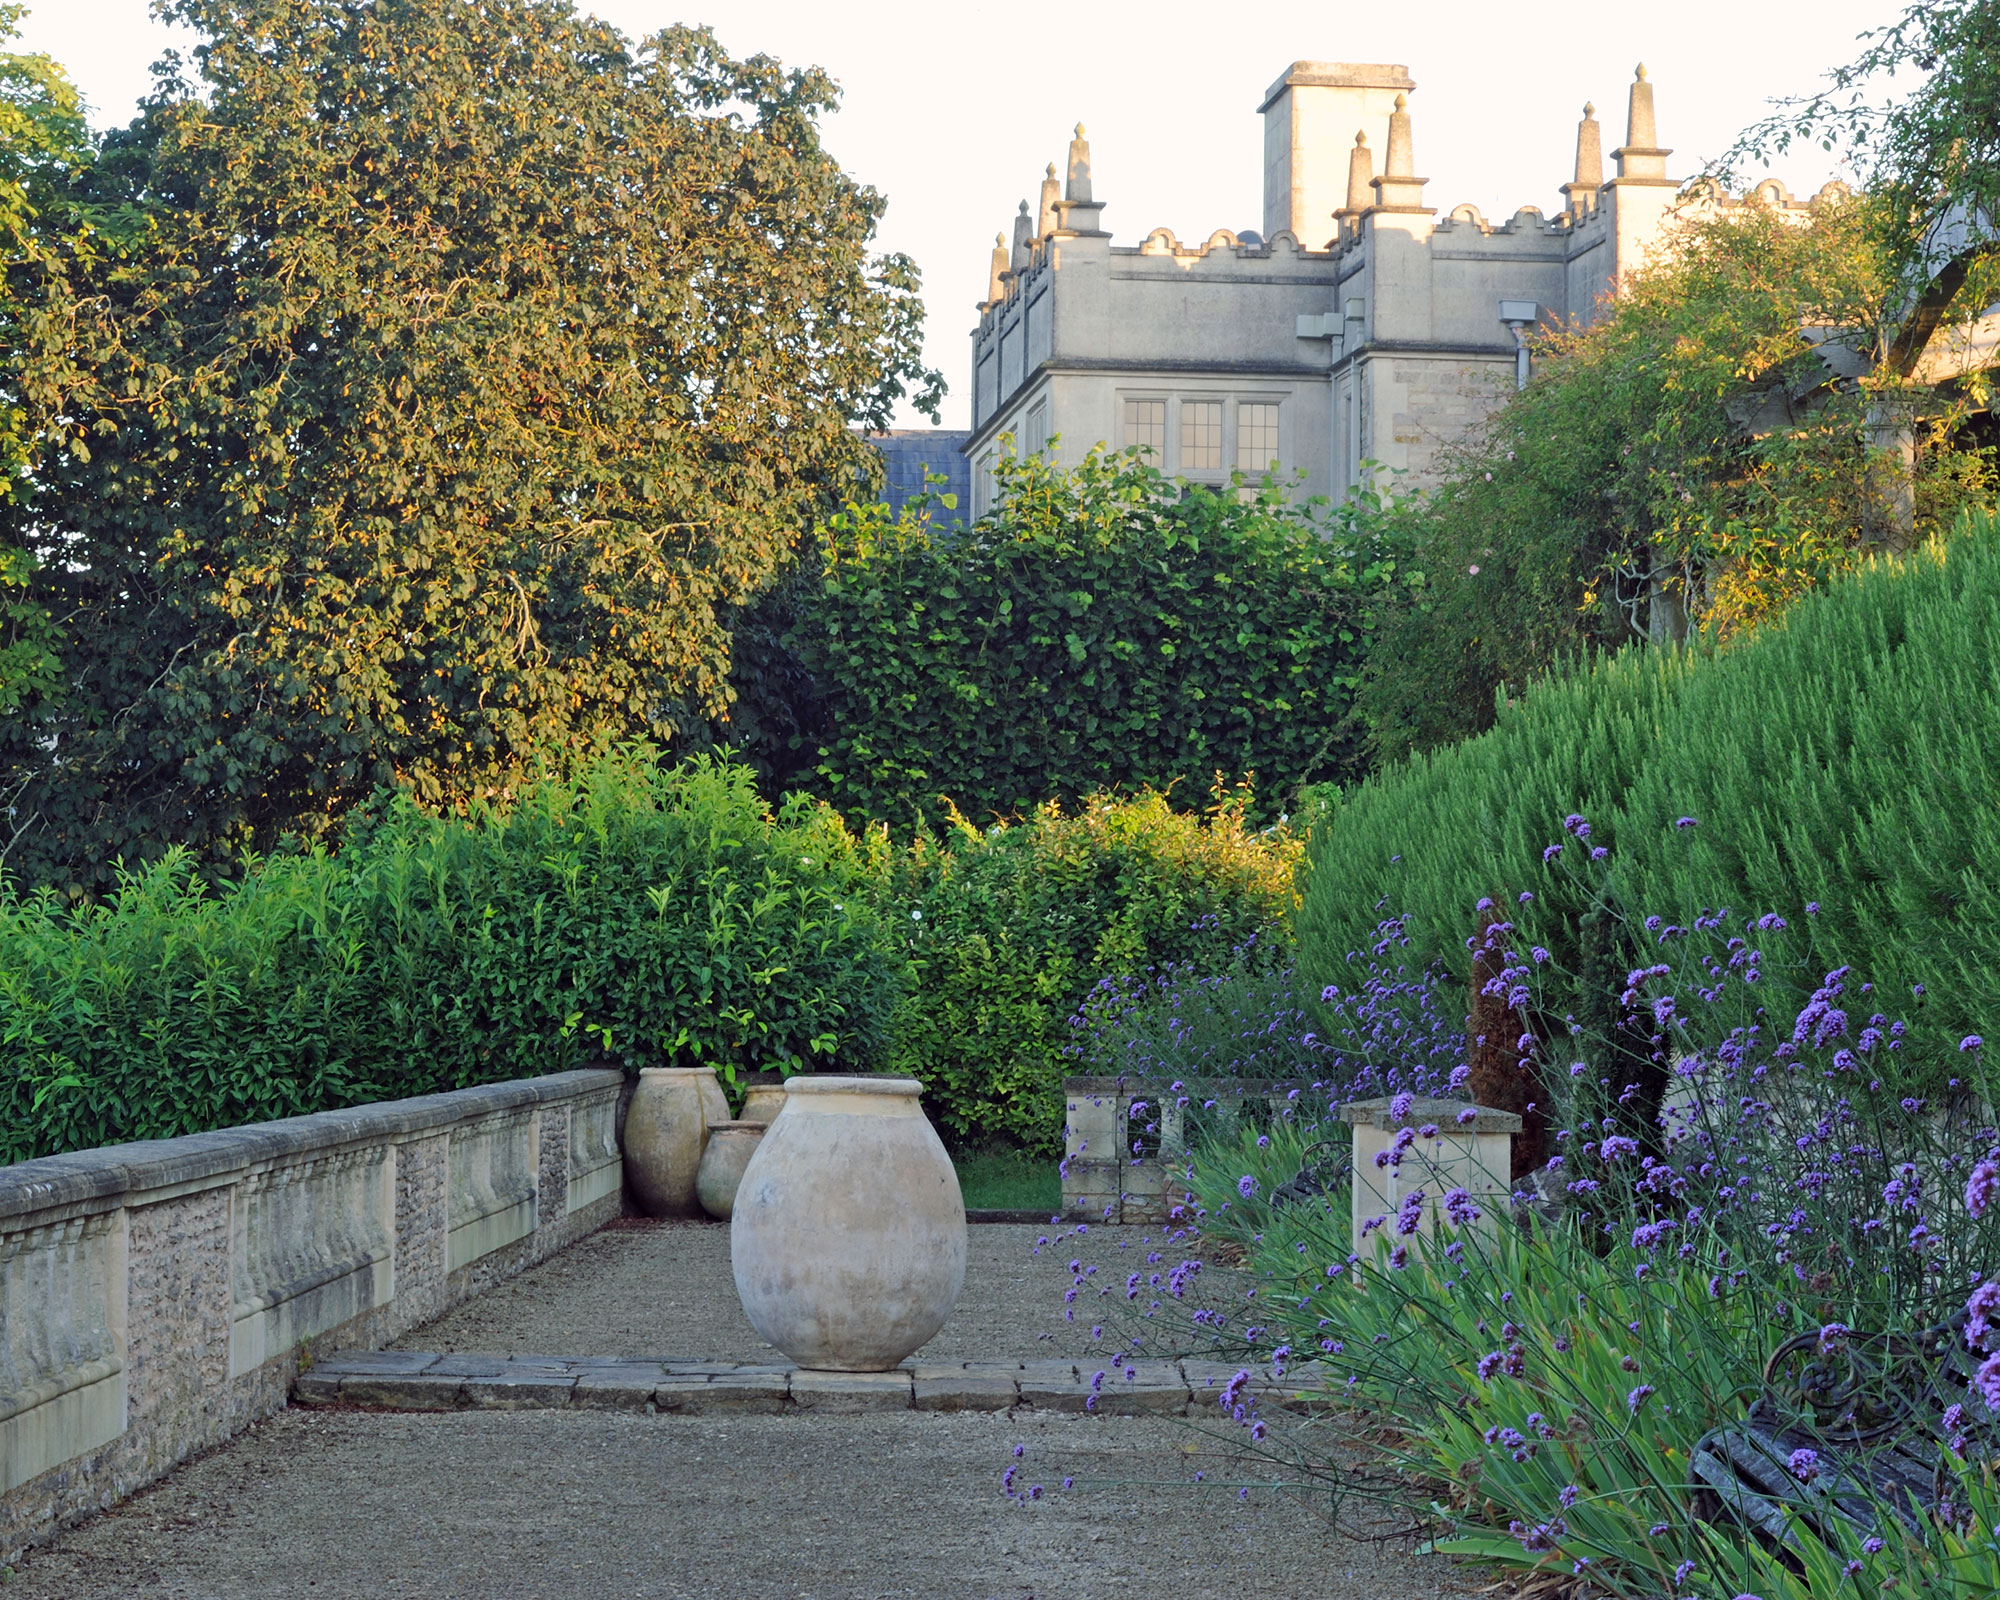 An example of courtyard garden ideas showing a large urn, purple flowers and hedges.